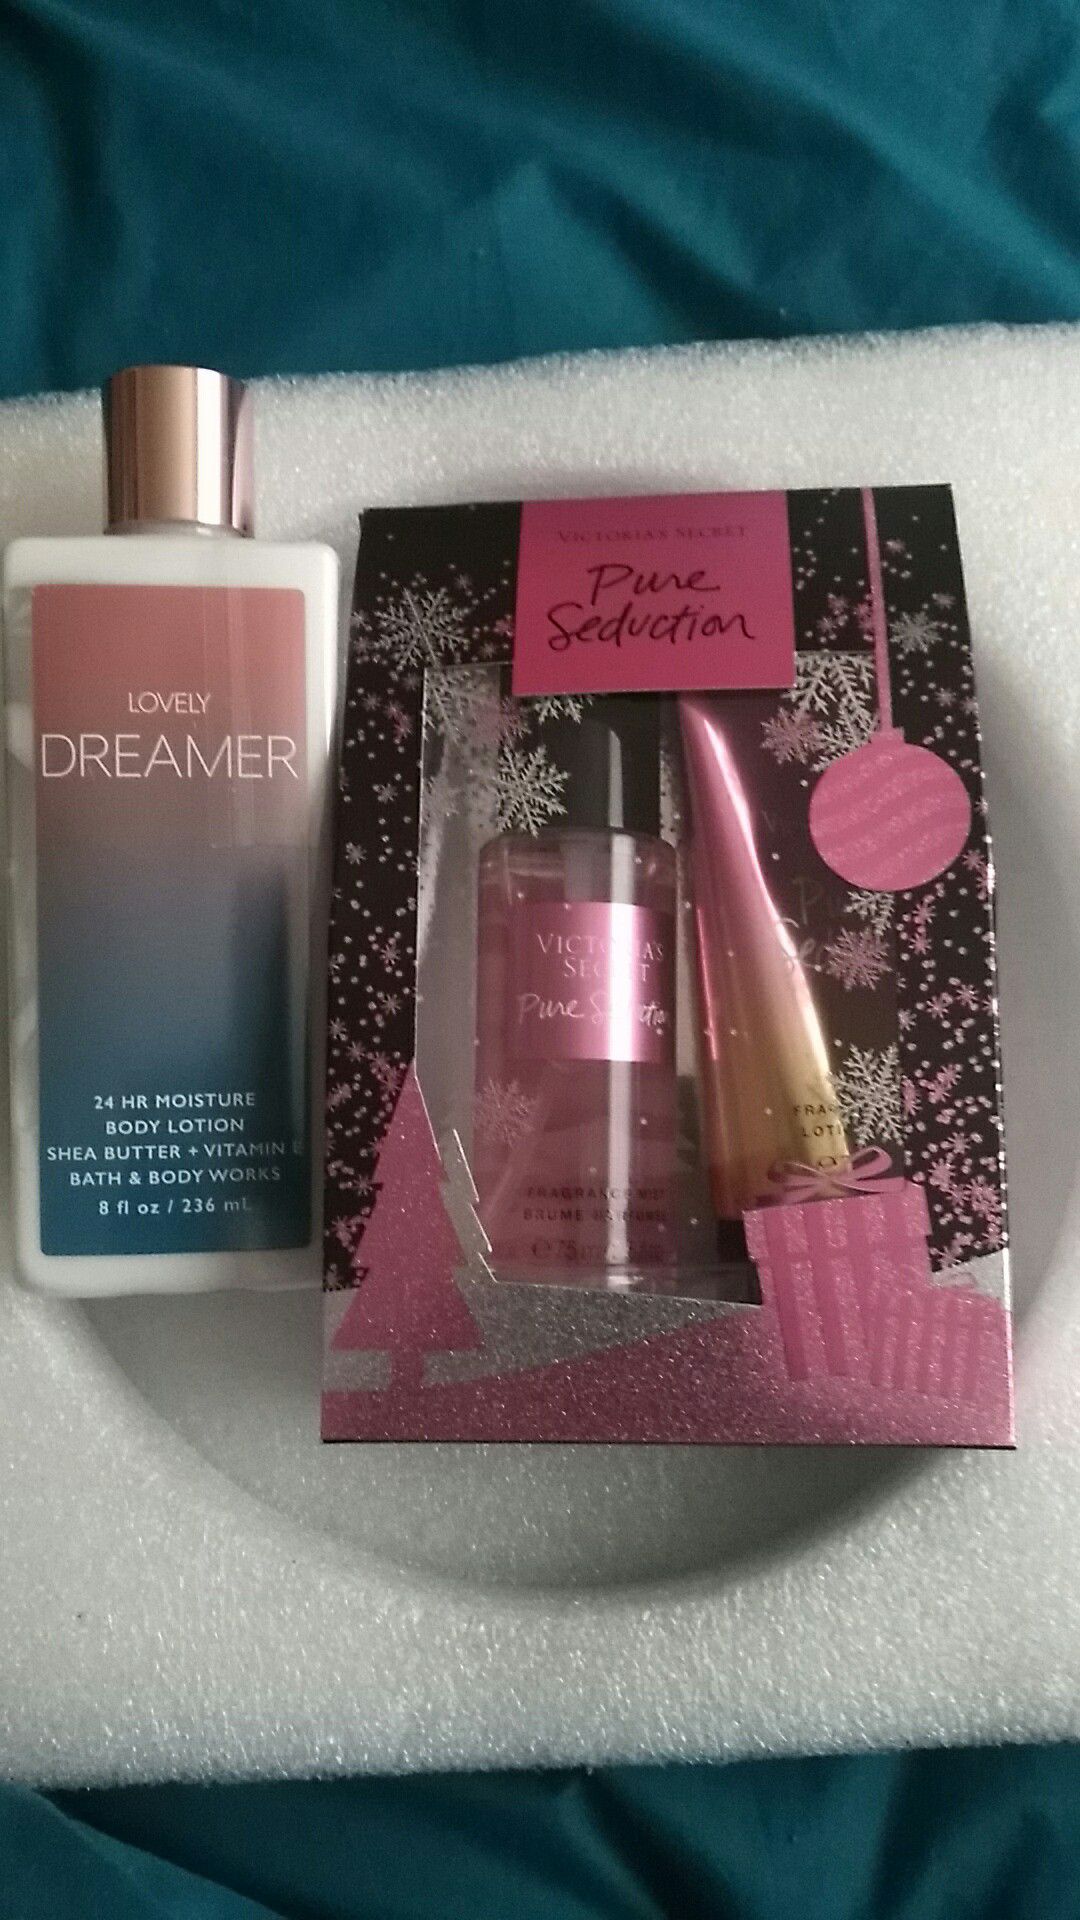 Victoria's secret set of 2. Pure seduction and lovely dreamer.